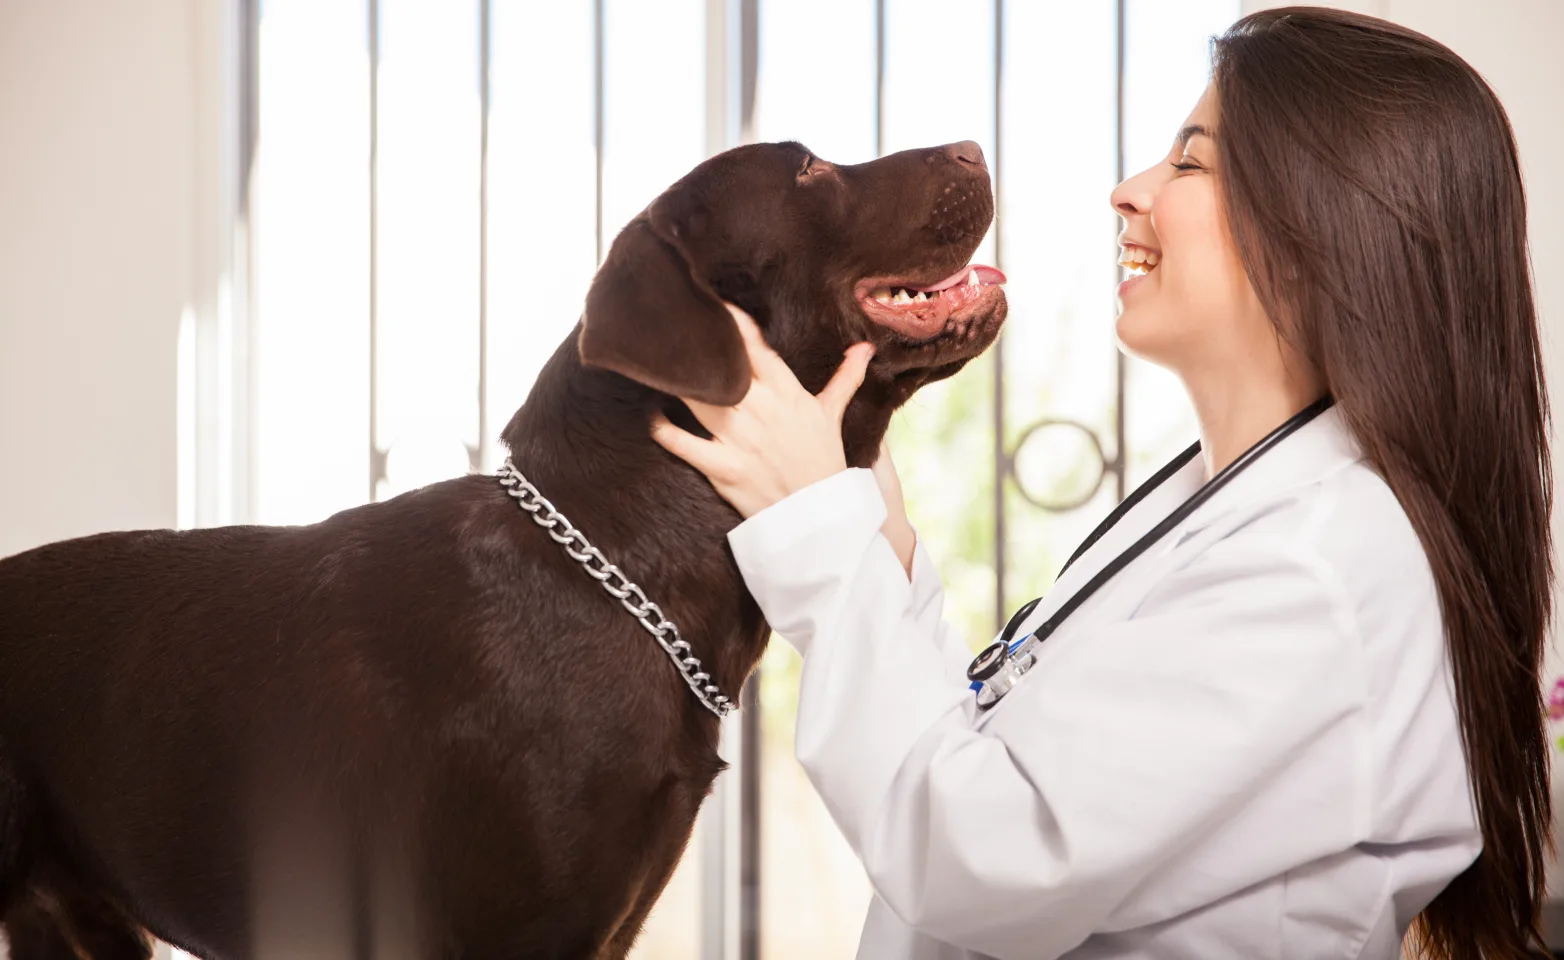 Light skinned woman veterinarian with long brown hair examining a brown Labrador dog and smiling